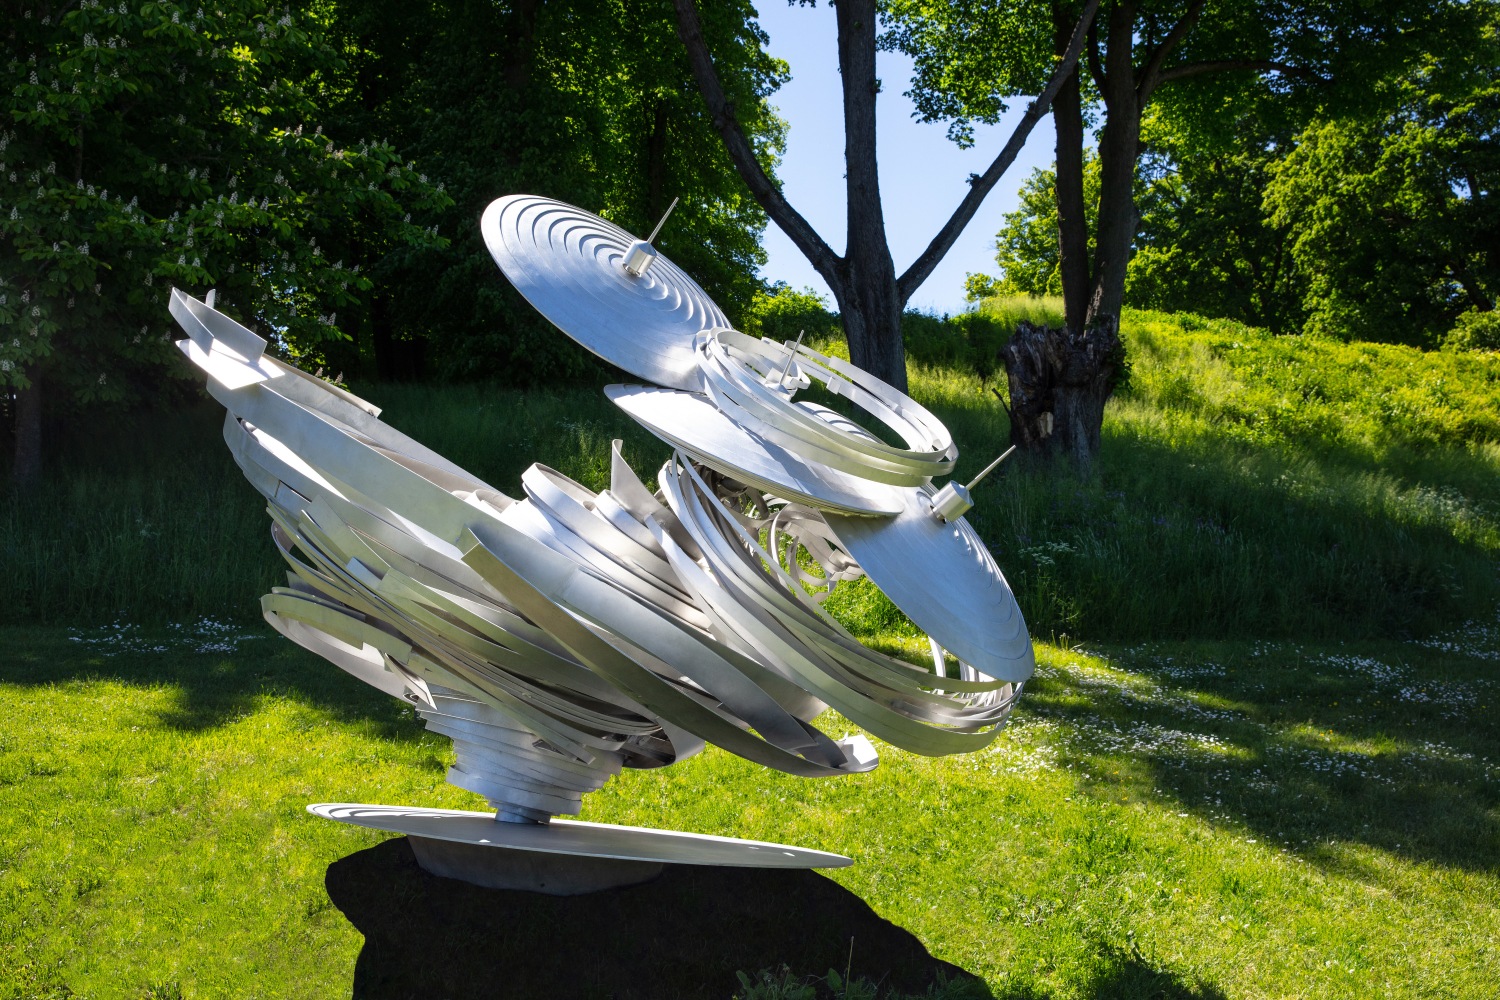 Outdoor installation view of large twisted aluminum sculpture by Alice Aycock